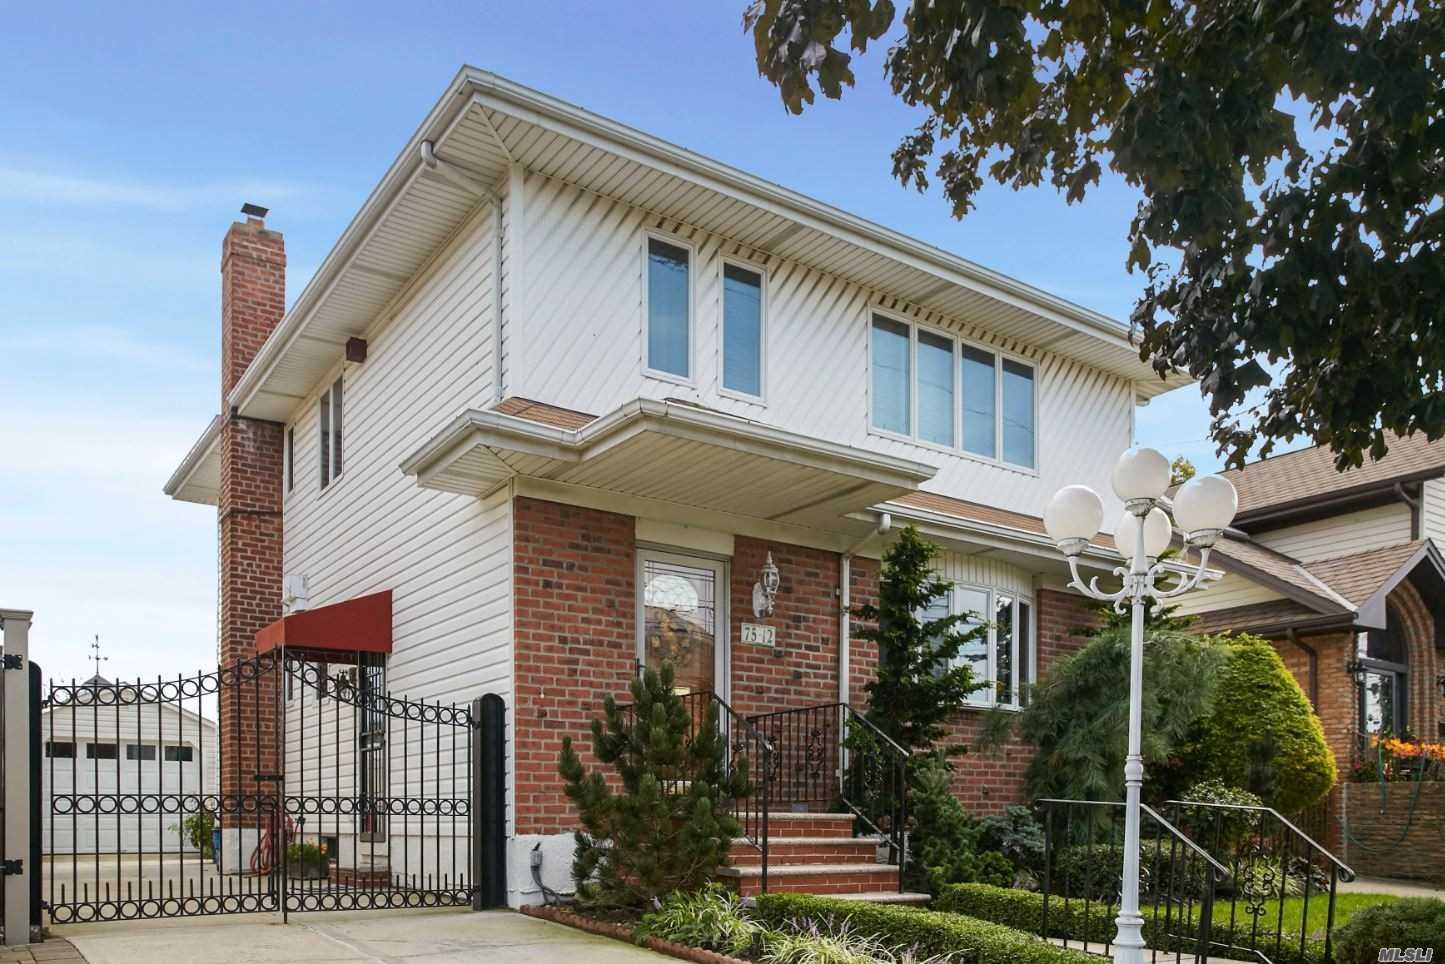 Beautiful 1 Family Detached Home On An Oversized Lot (40X95) In The Heart Of Midle Village Located On A Desirable Block (Penelope Ave). Modern Eat-In-Kitchen W/ Sub Zero Refrigerator, Formal Diningroom, Spacious Livingroom, 4 Bedrooms, Full Finished Basment, Garage, Private Driveway And Private Yard...